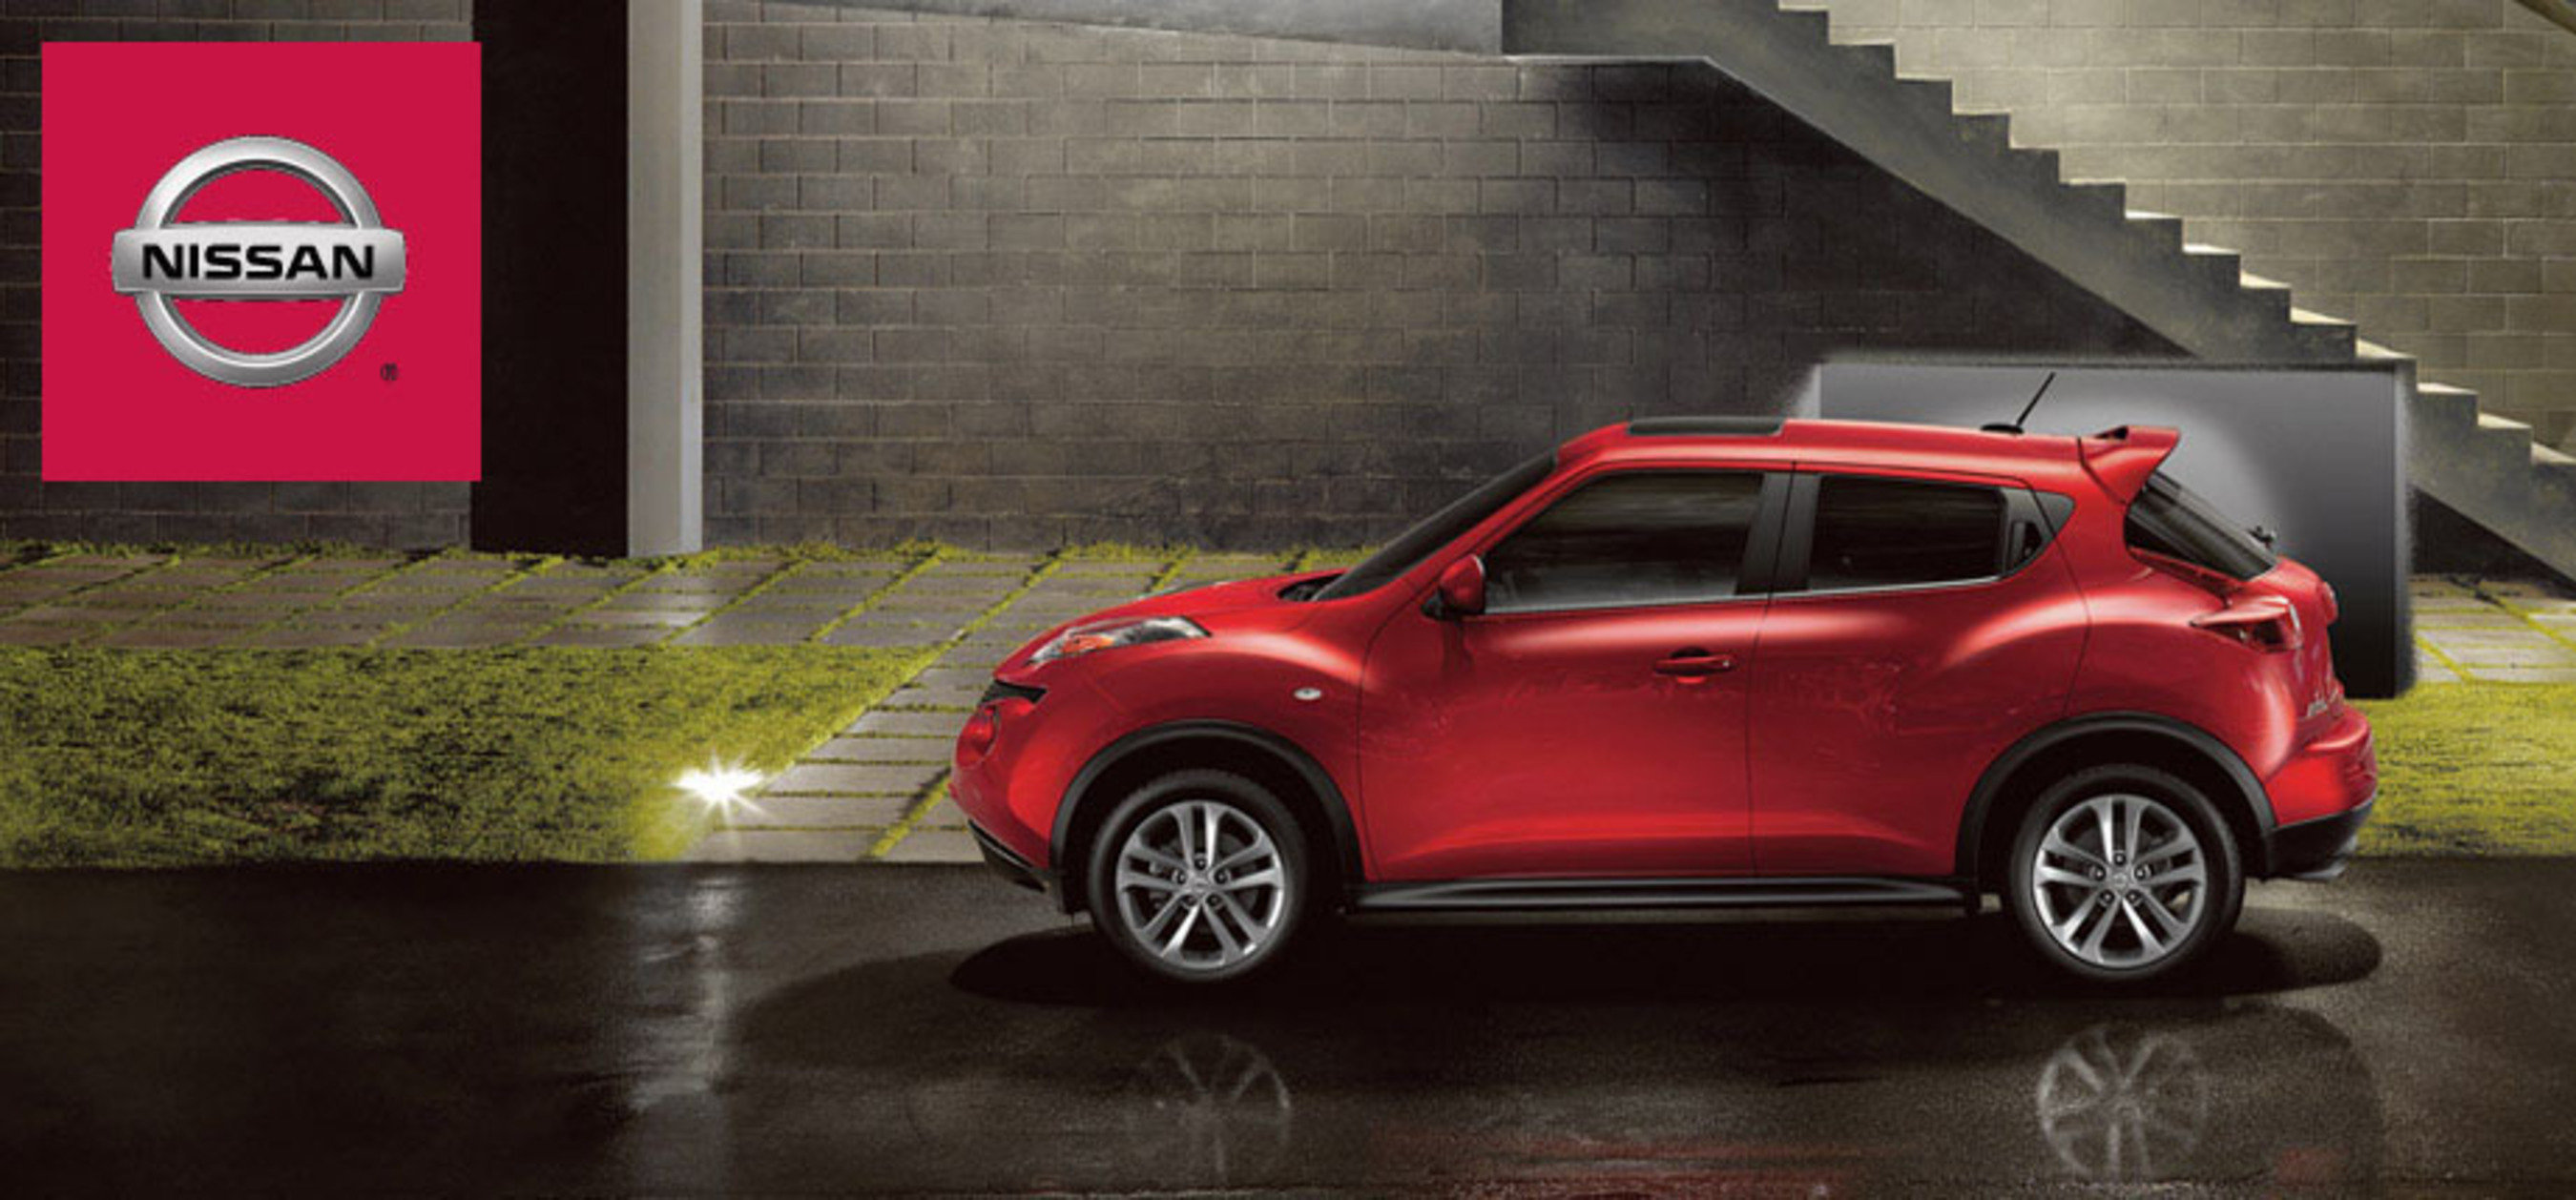 When equipped with the new engine, the Nissan Juke will be capable of producing a best-in-class output of 215 horsepower. (PRNewsFoto/Briggs Auto Group) (PRNewsFoto/BRIGGS AUTO GROUP)